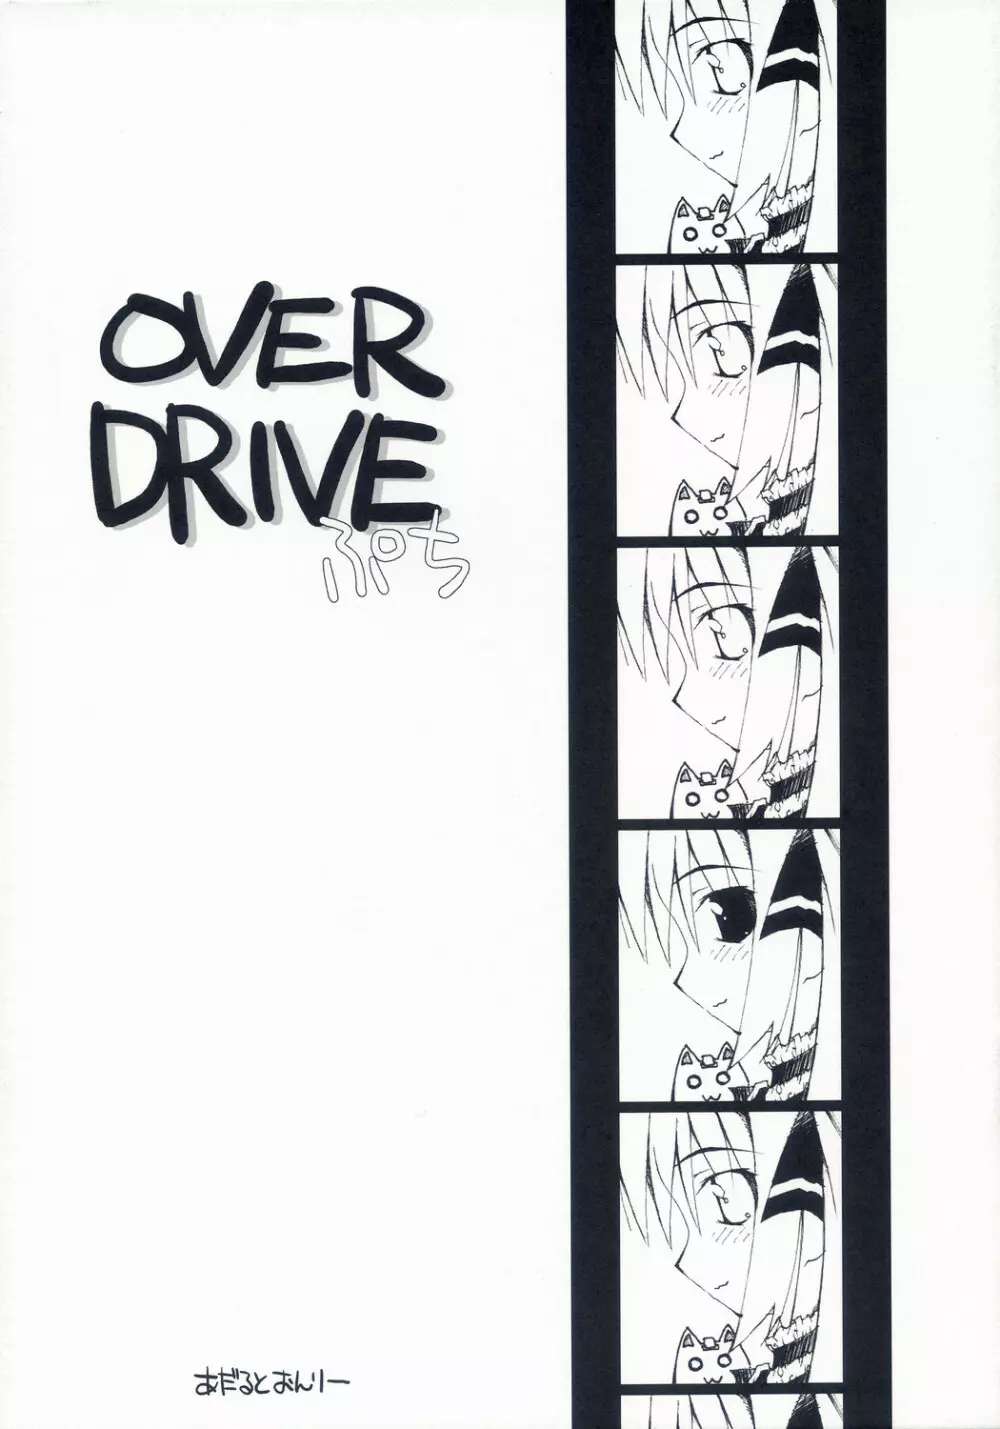 OVER DRIVE ぷち